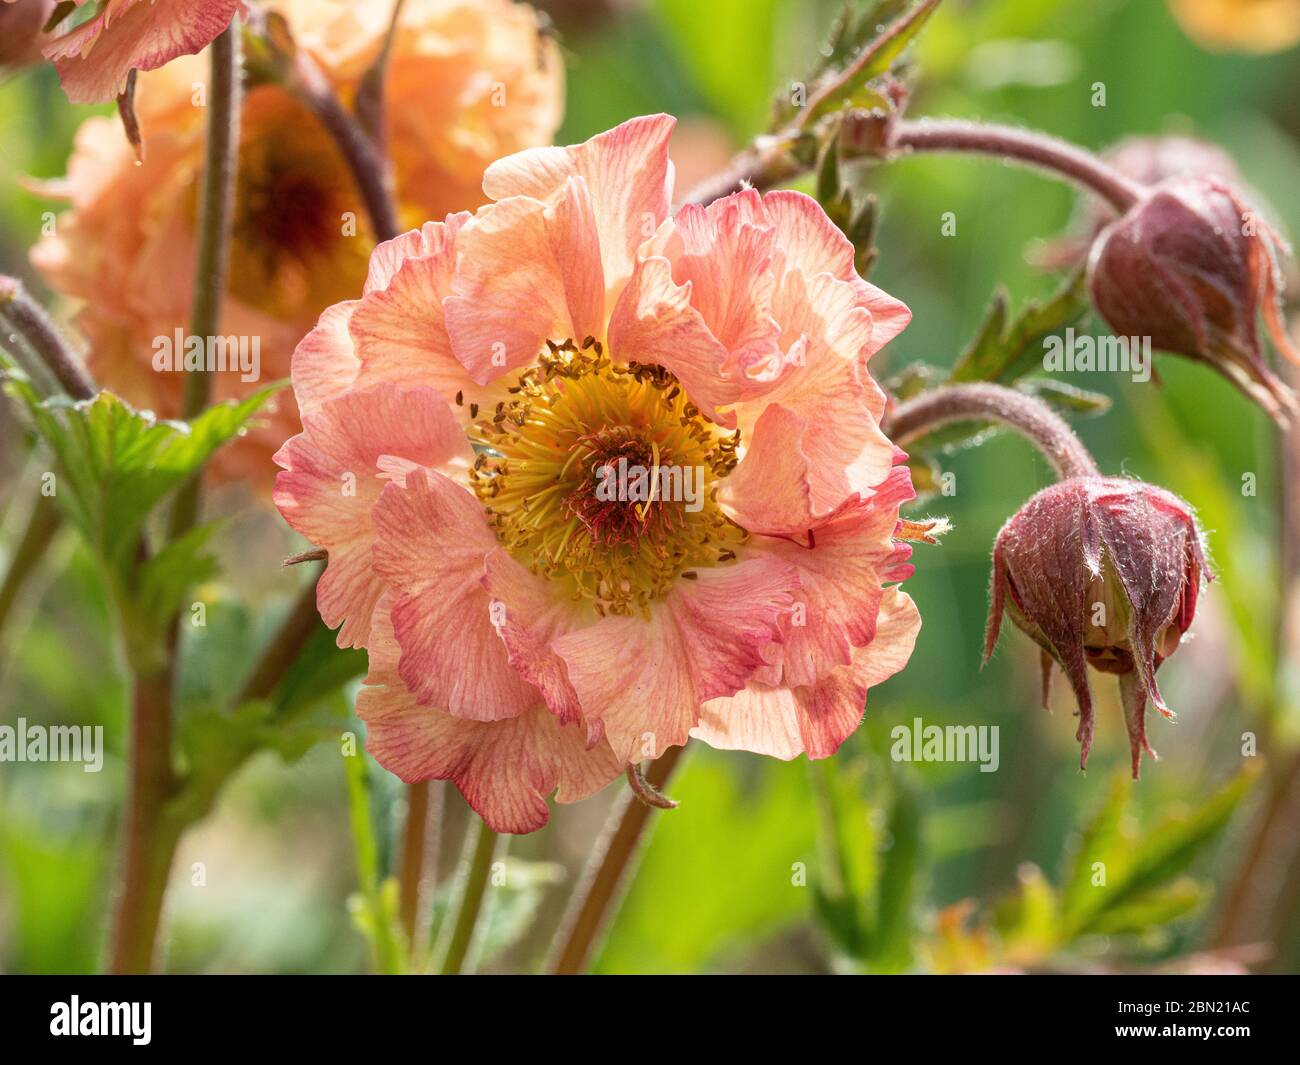 A close up of the apricot coloured flower of Geum rivale Mai Tai Stock Photo